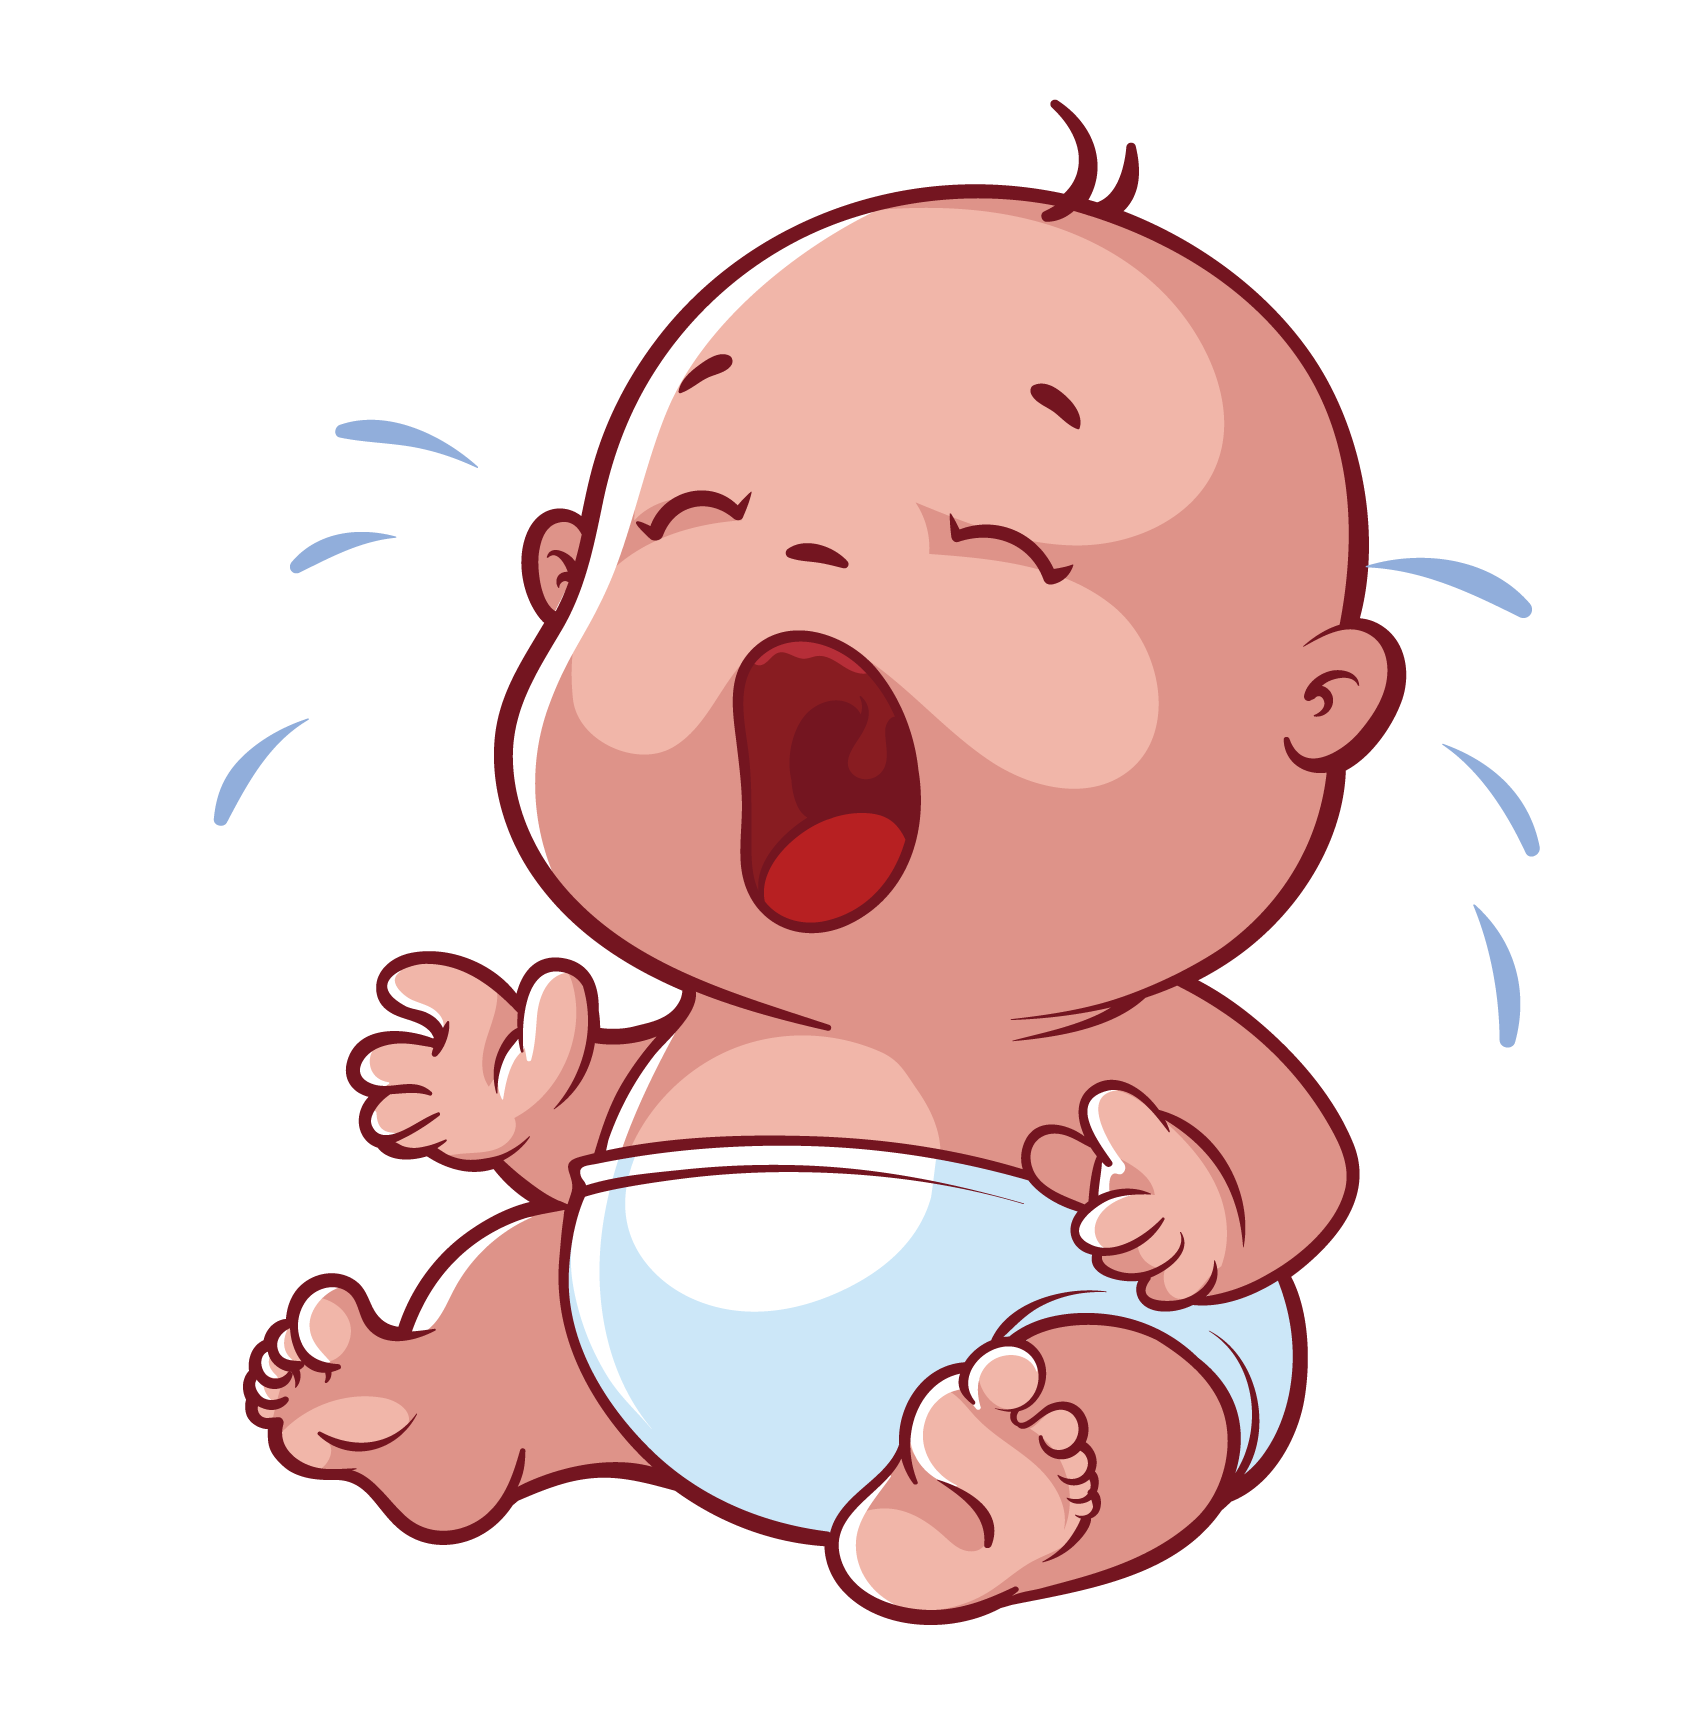 Infant Cartoon Crying - Crying baby png download - 1696 ...